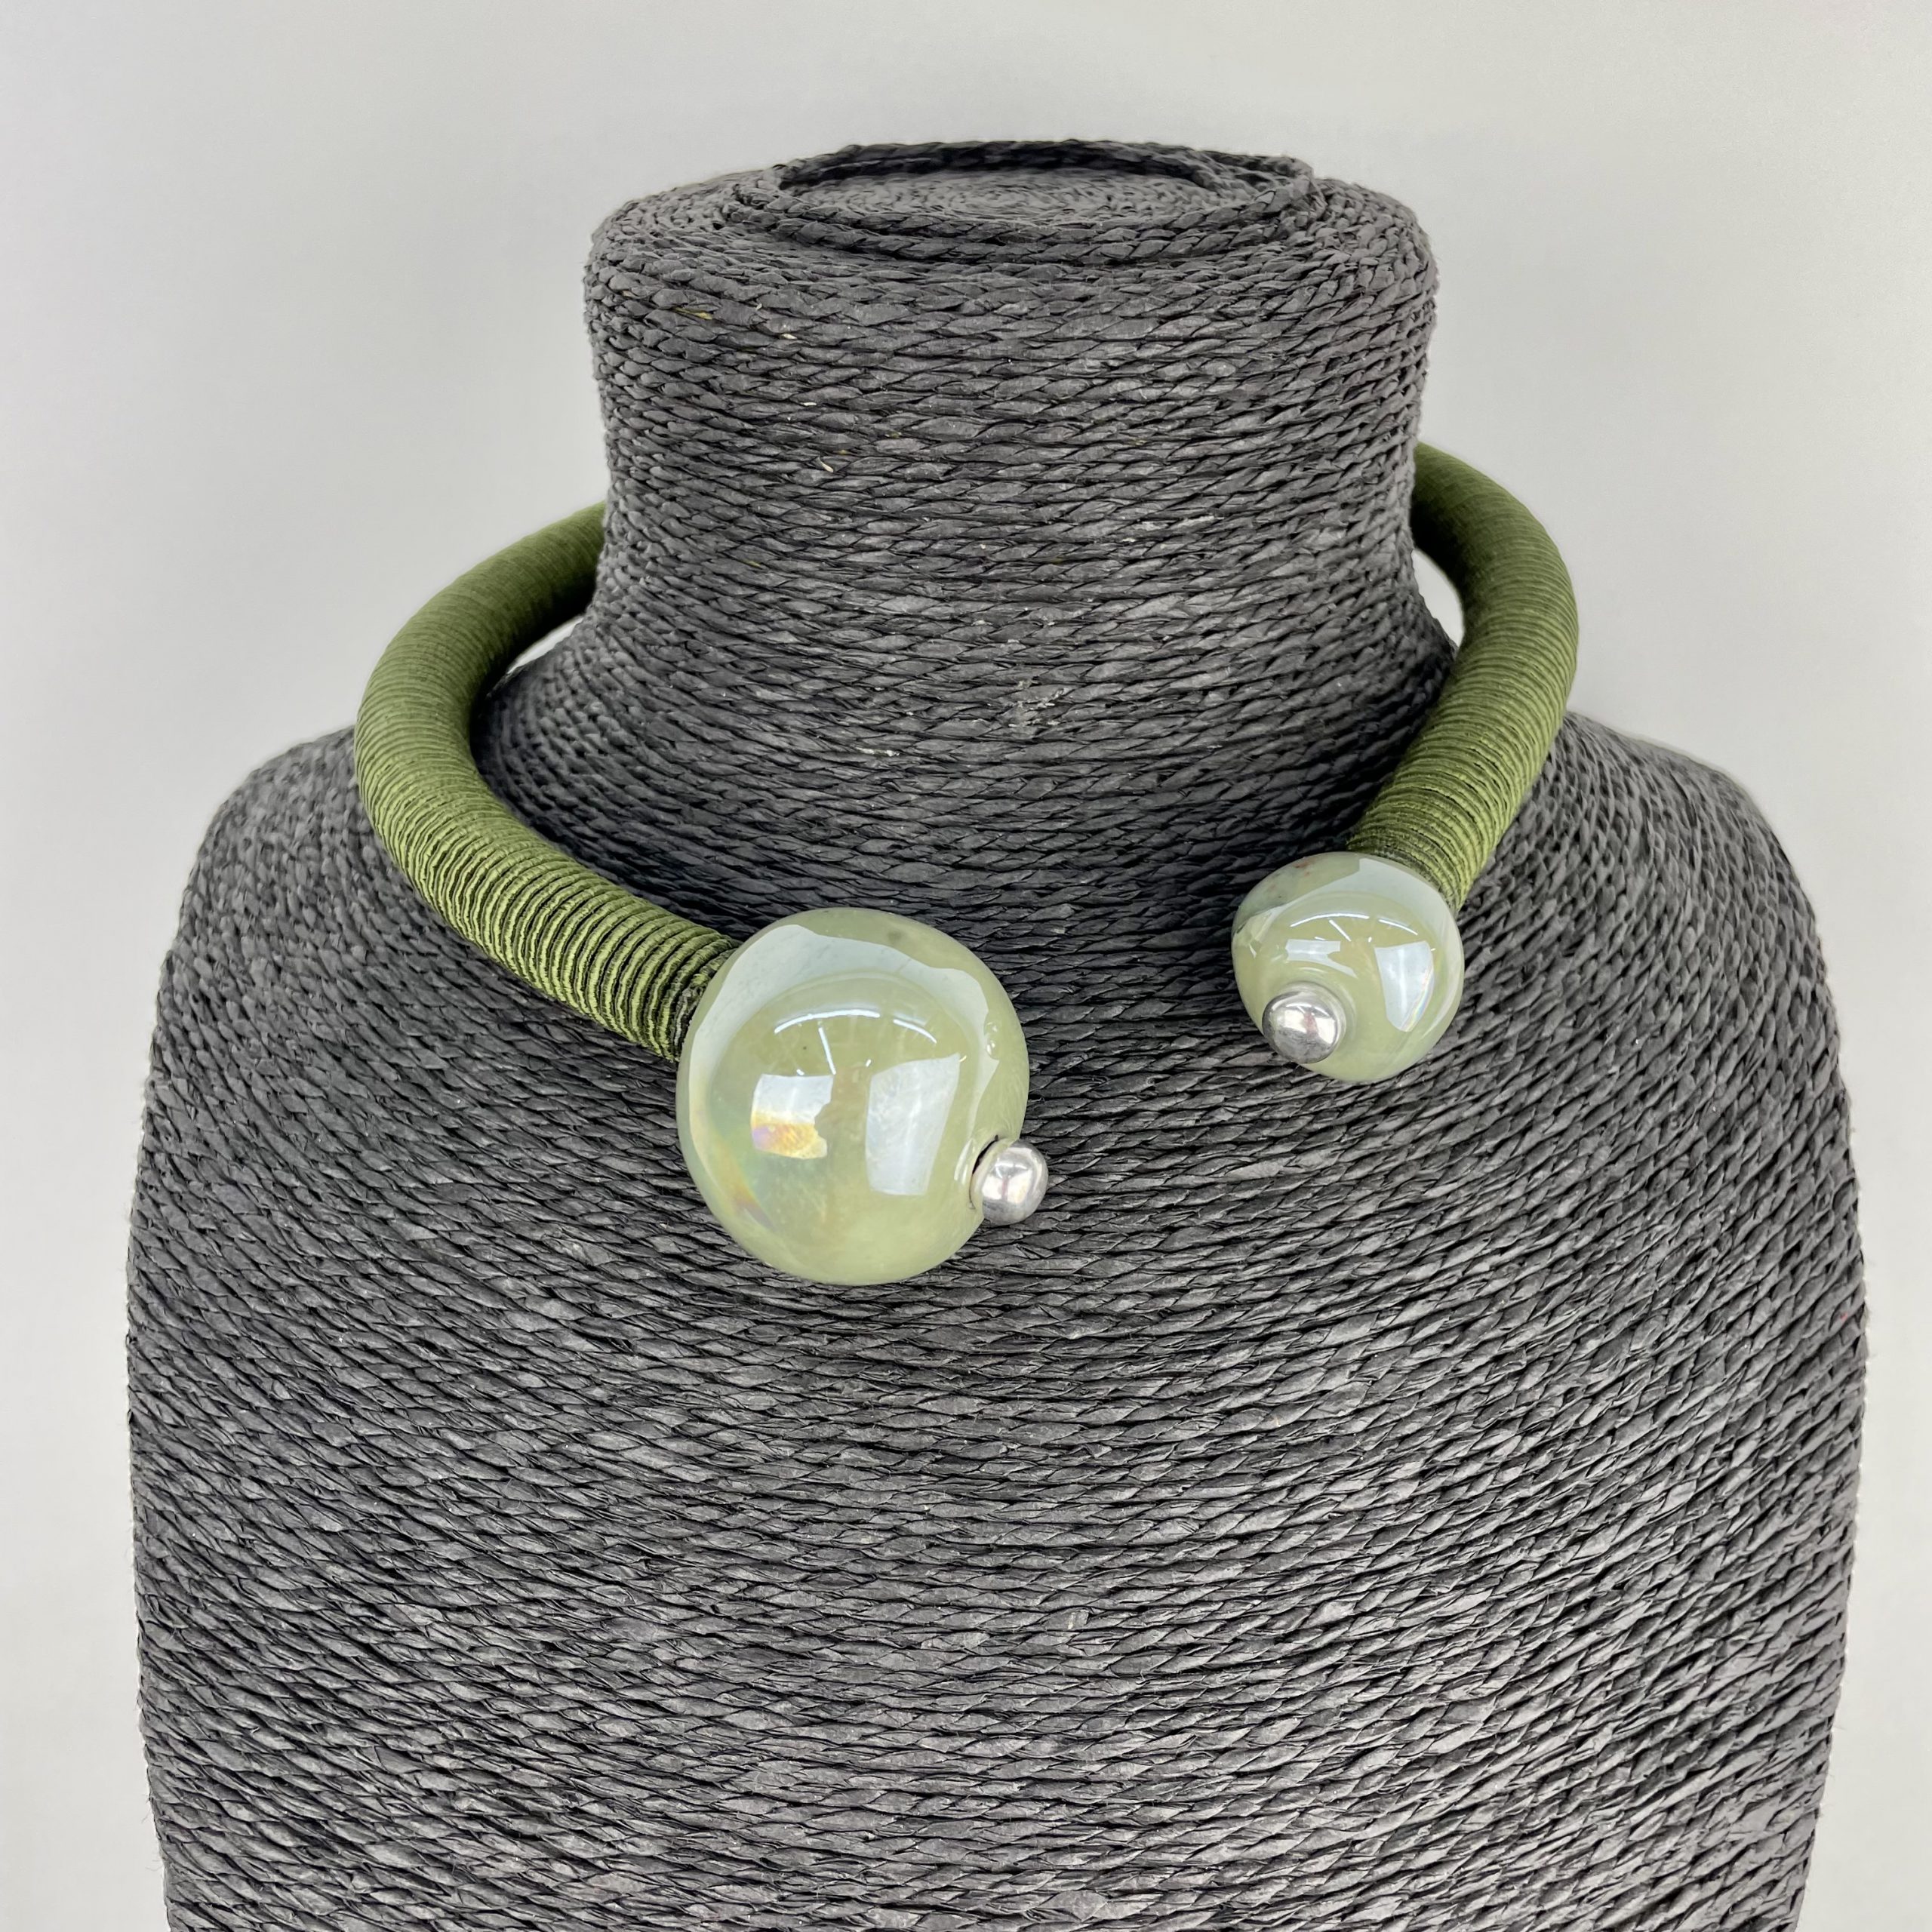 Christina Brampti Short Necklace on Silk Cord with Ceramic Beads in ...